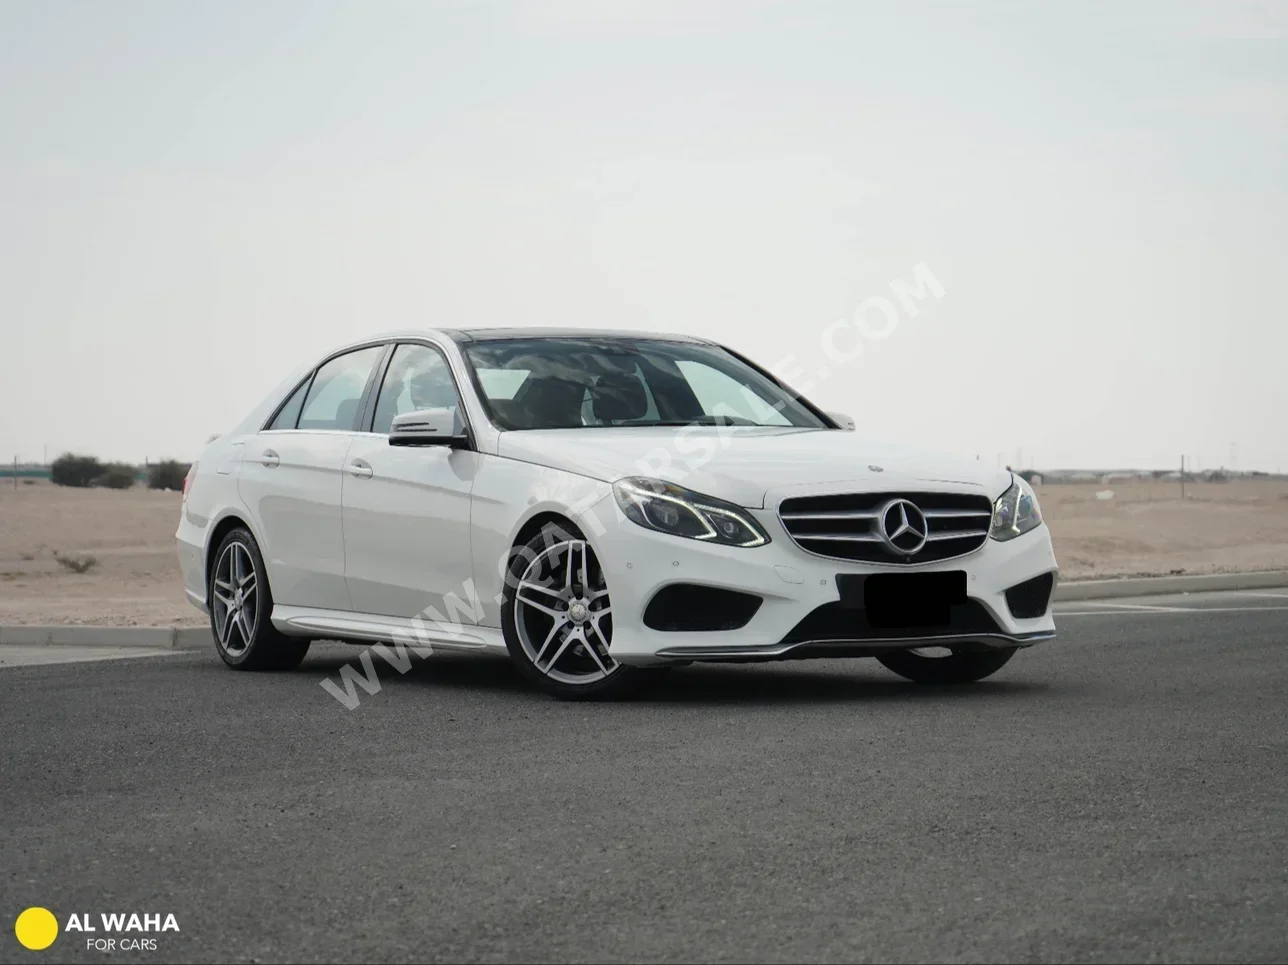 Mercedes-Benz  E-Class  300 AMG  2015  Automatic  76,000 Km  4 Cylinder  Front Wheel Drive (FWD)  SUV  White